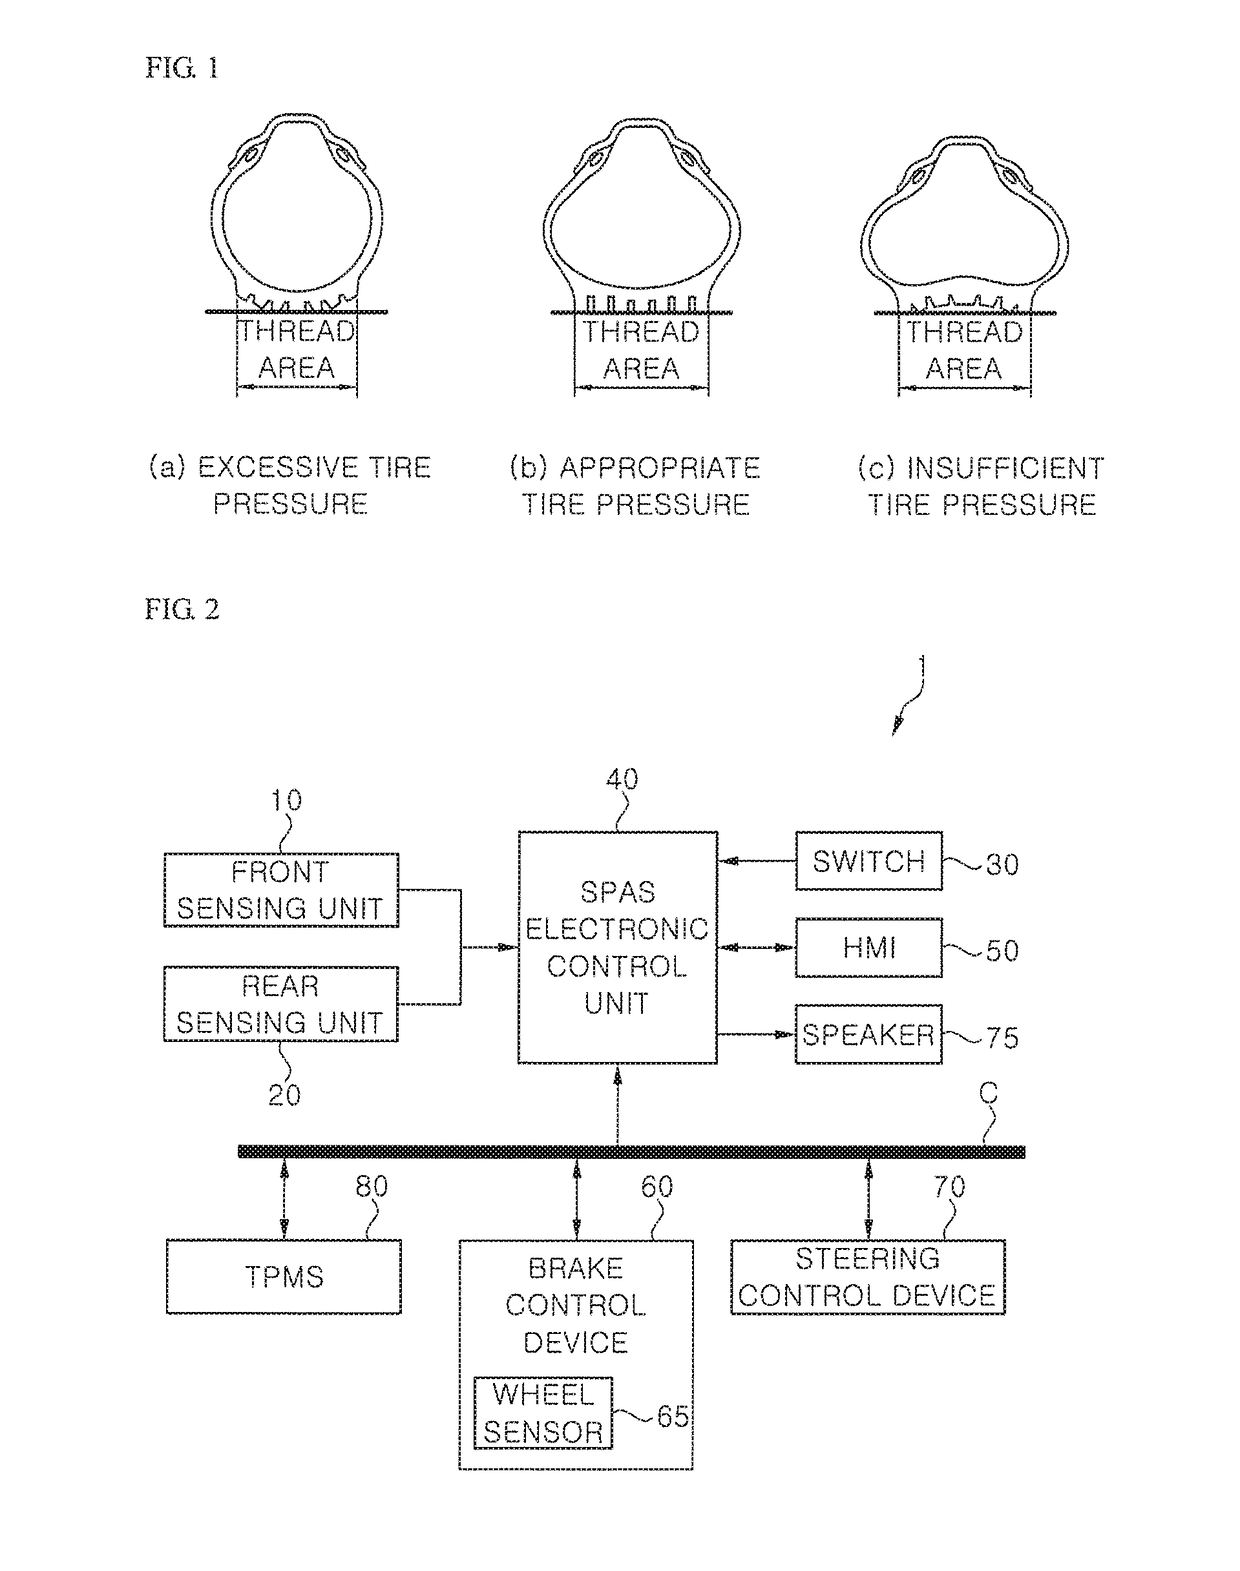 Parking assistance device using tire pressure monitoring system